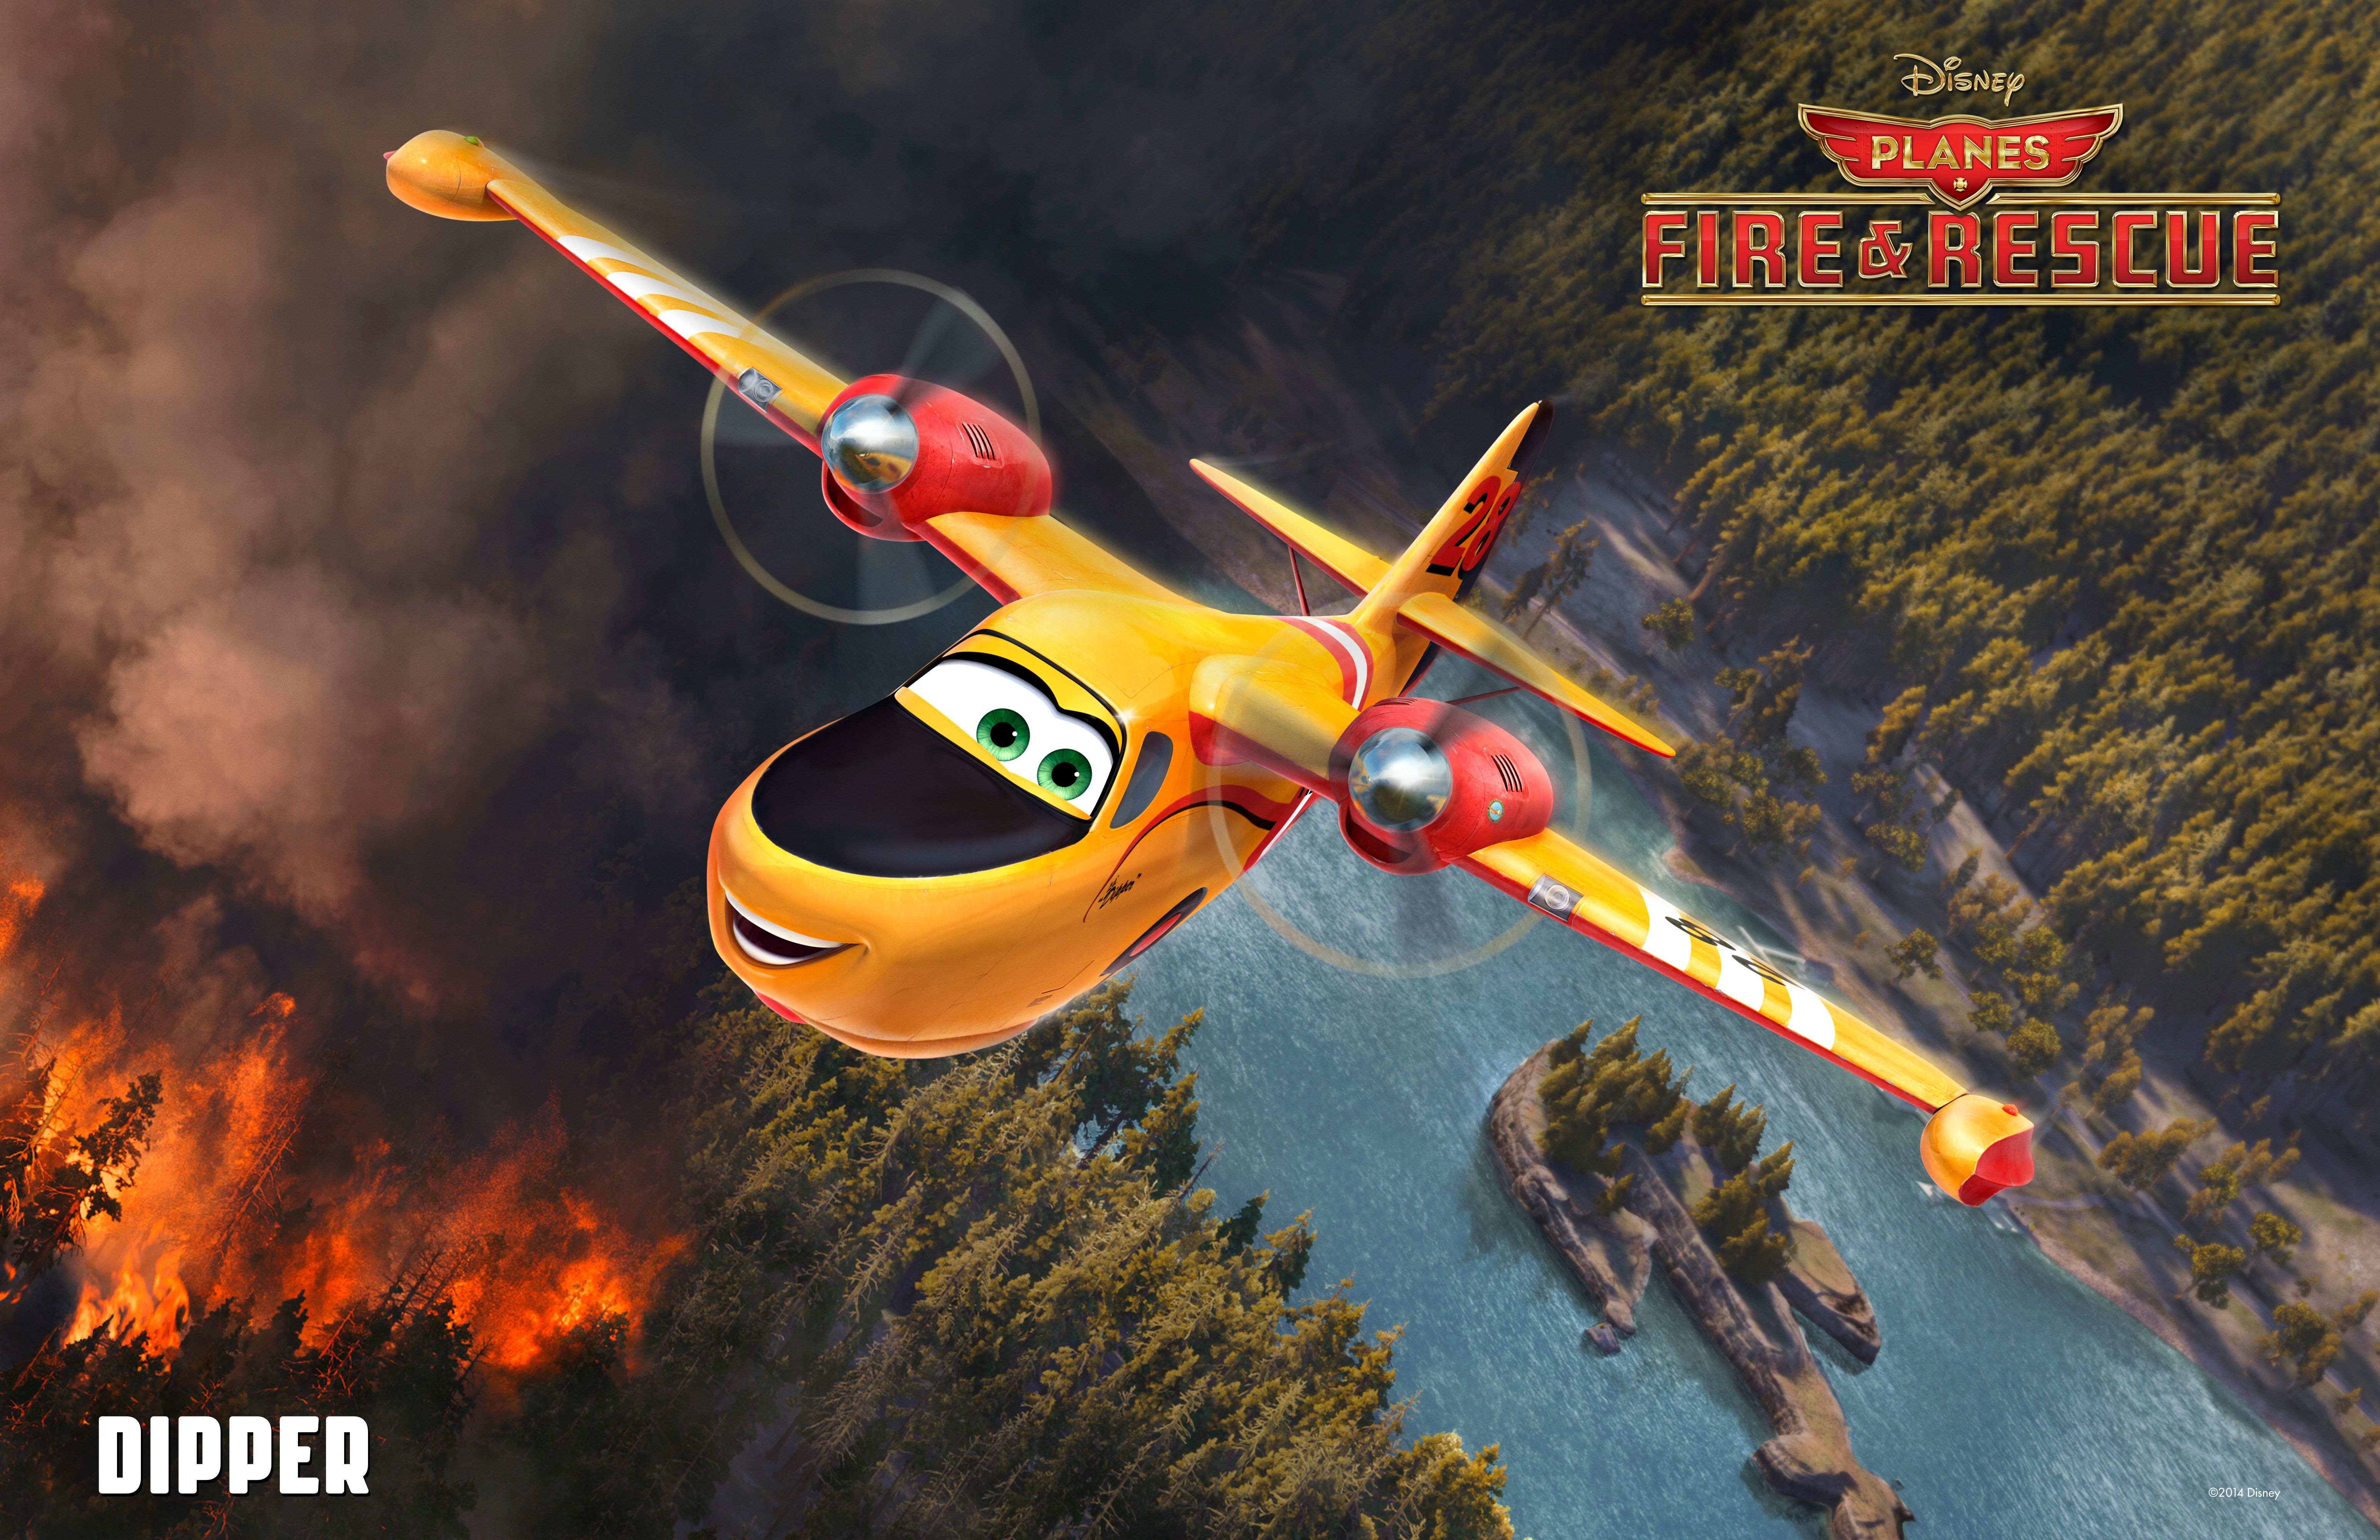 Planes Fire and Rescue Dipper Poster